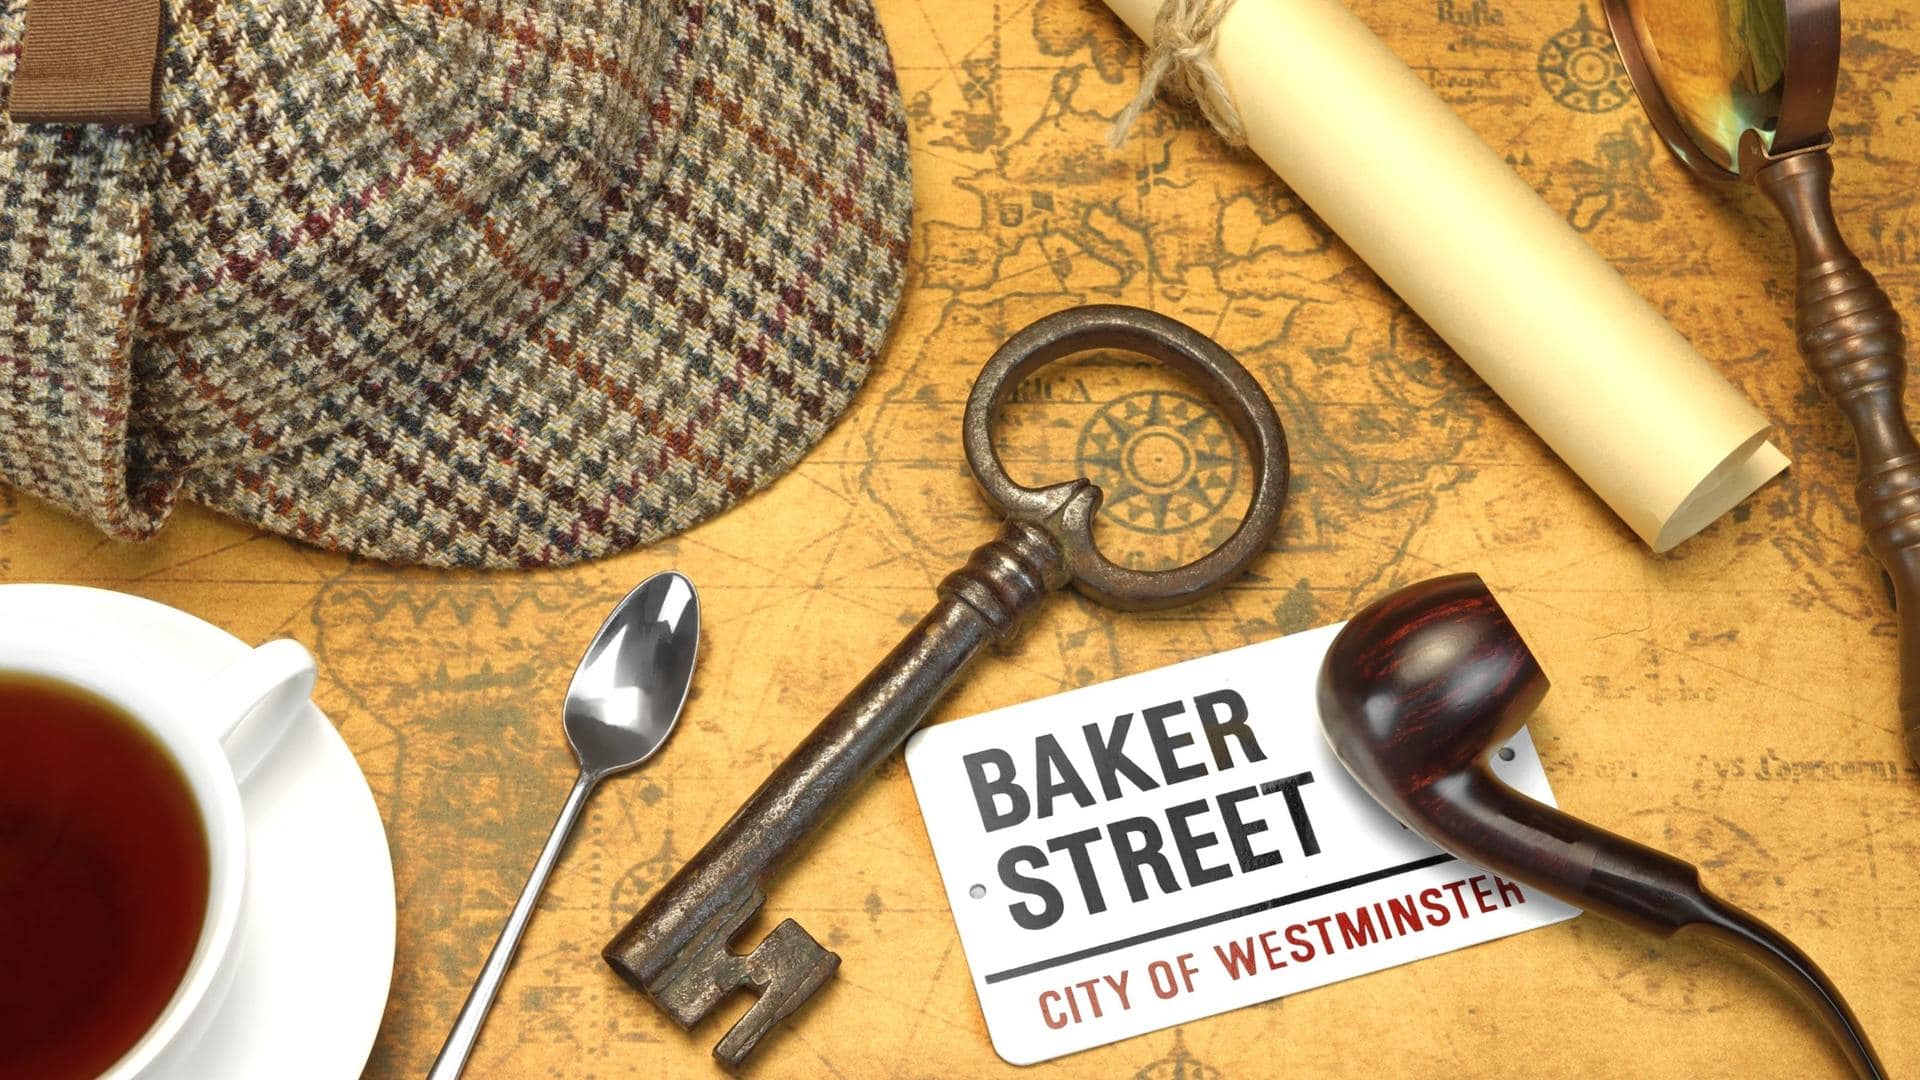 Sherlock Holmes Day: Mind-boggling facts about the world's favorite detective